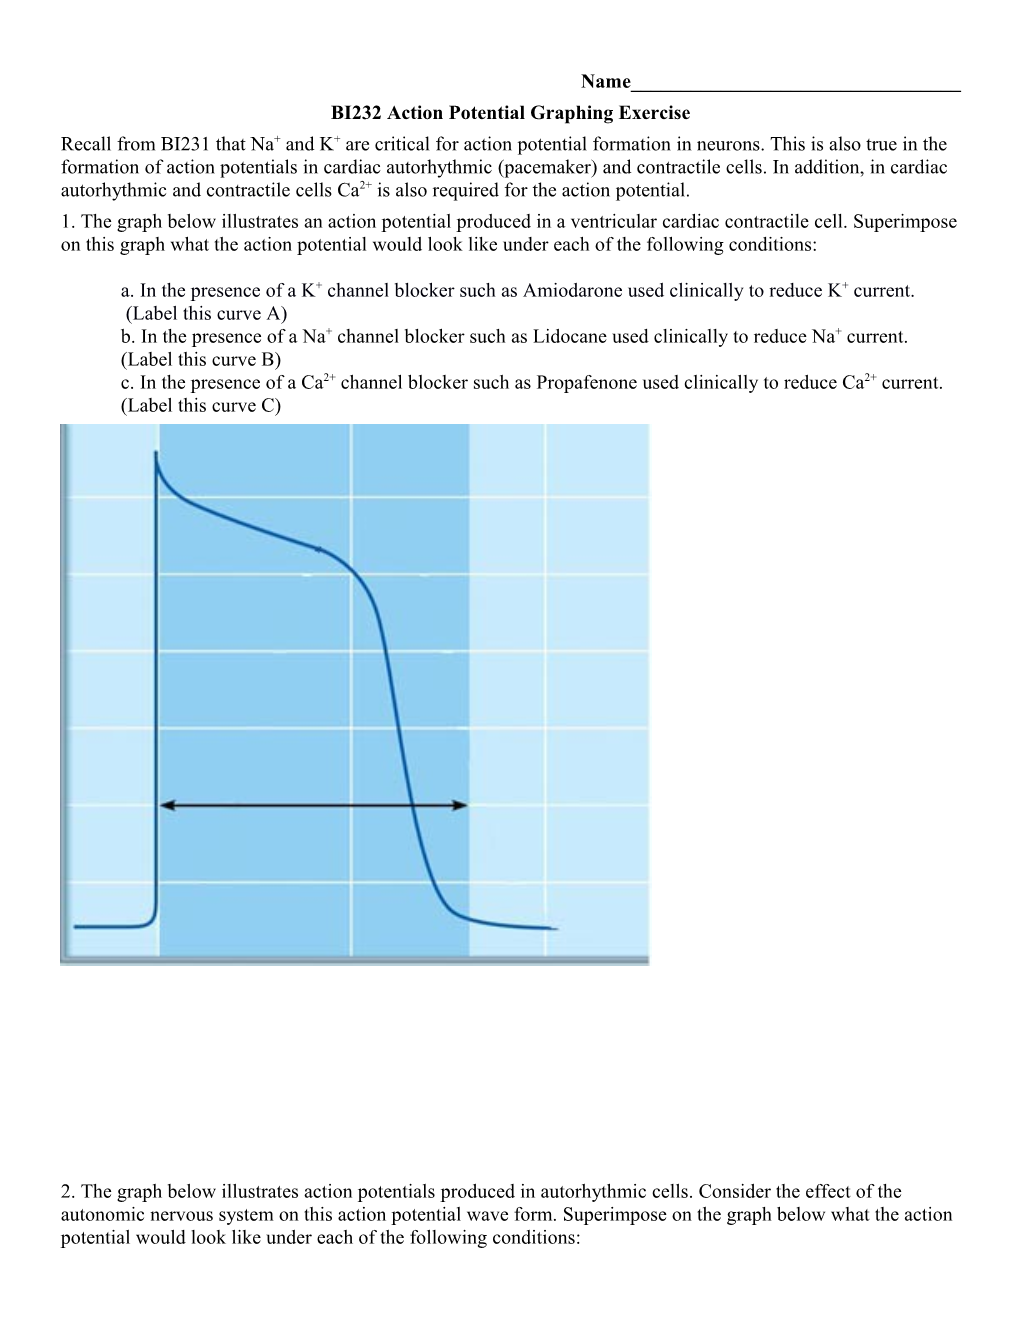 BI232 Action Potential Graphing Exercise